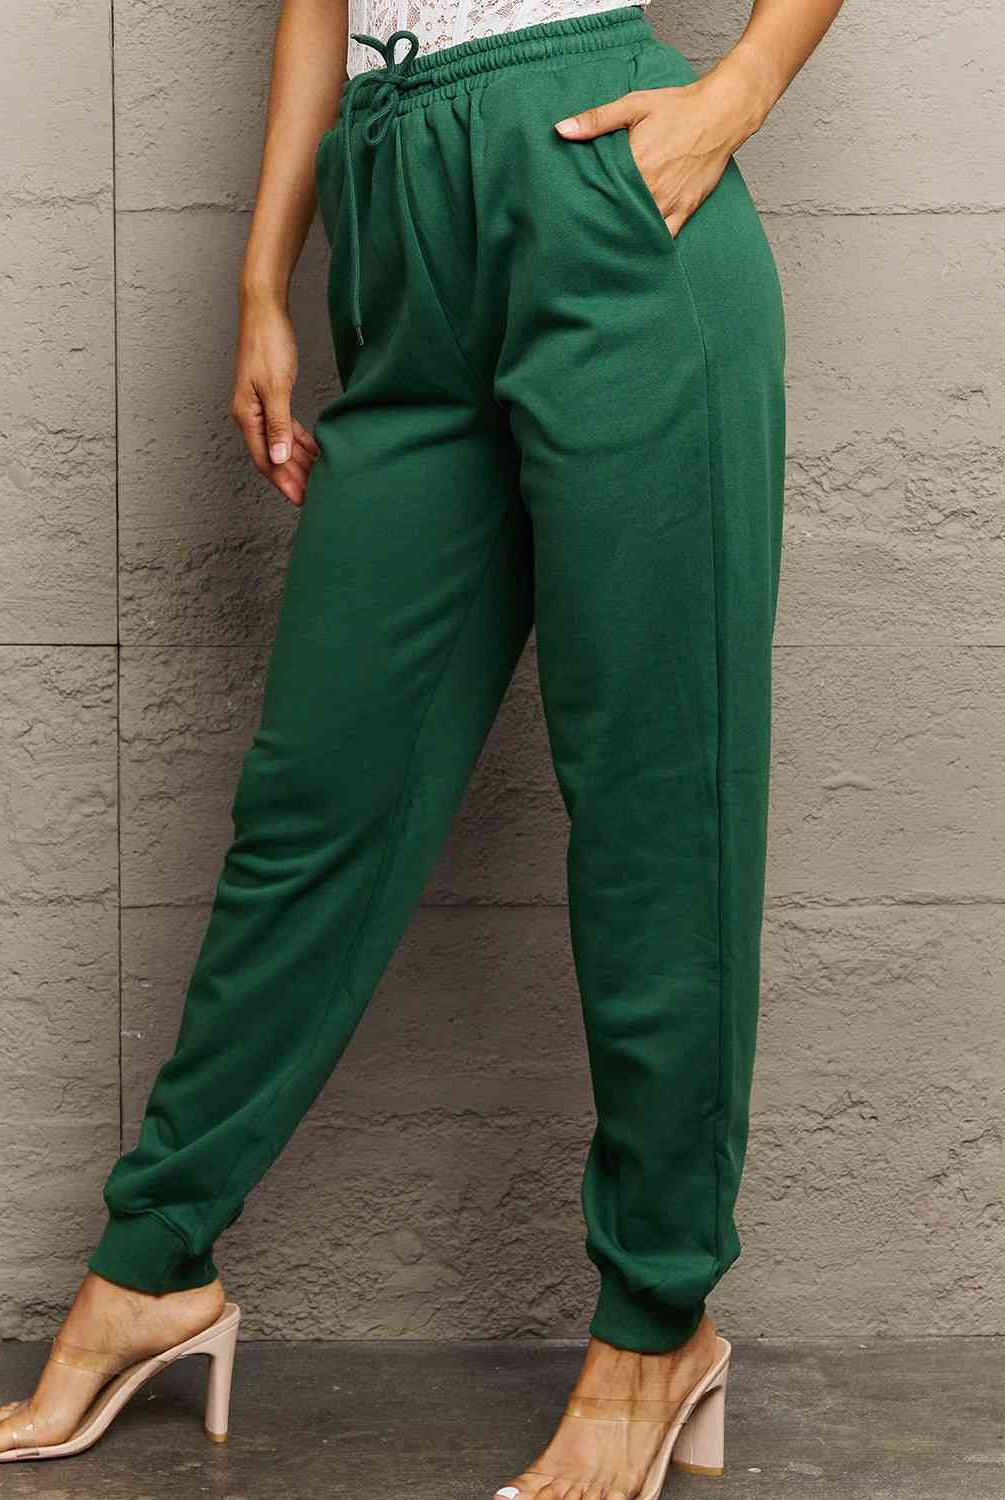 Simply Love Full Size Drawstring Sweatpants - GemThreads Boutique